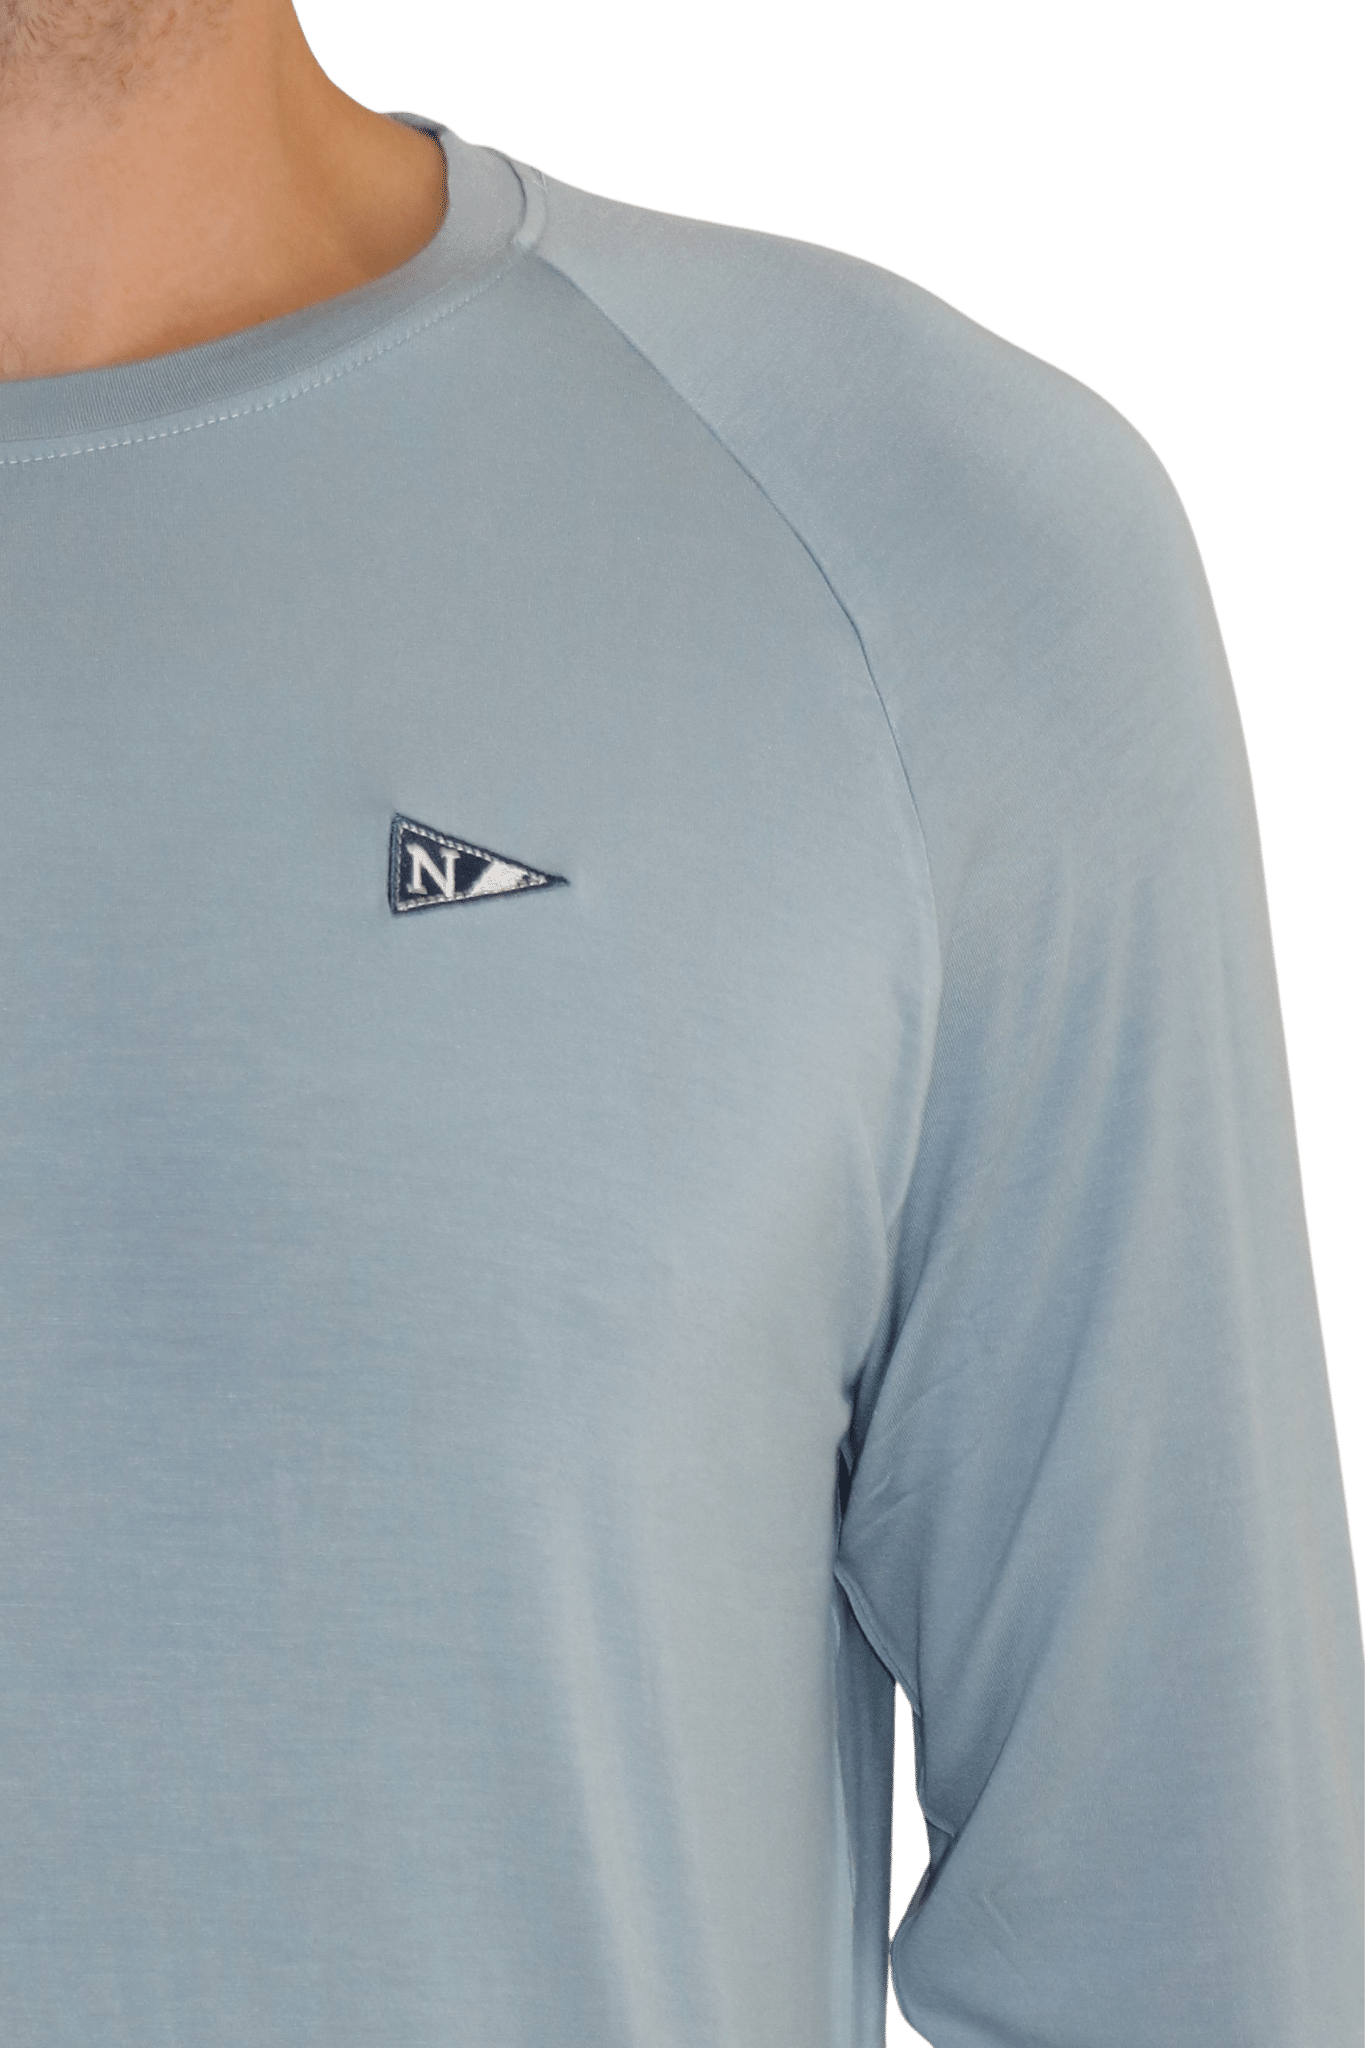 Front logo of the navy icon long sleeve bamboo fishing shirt.